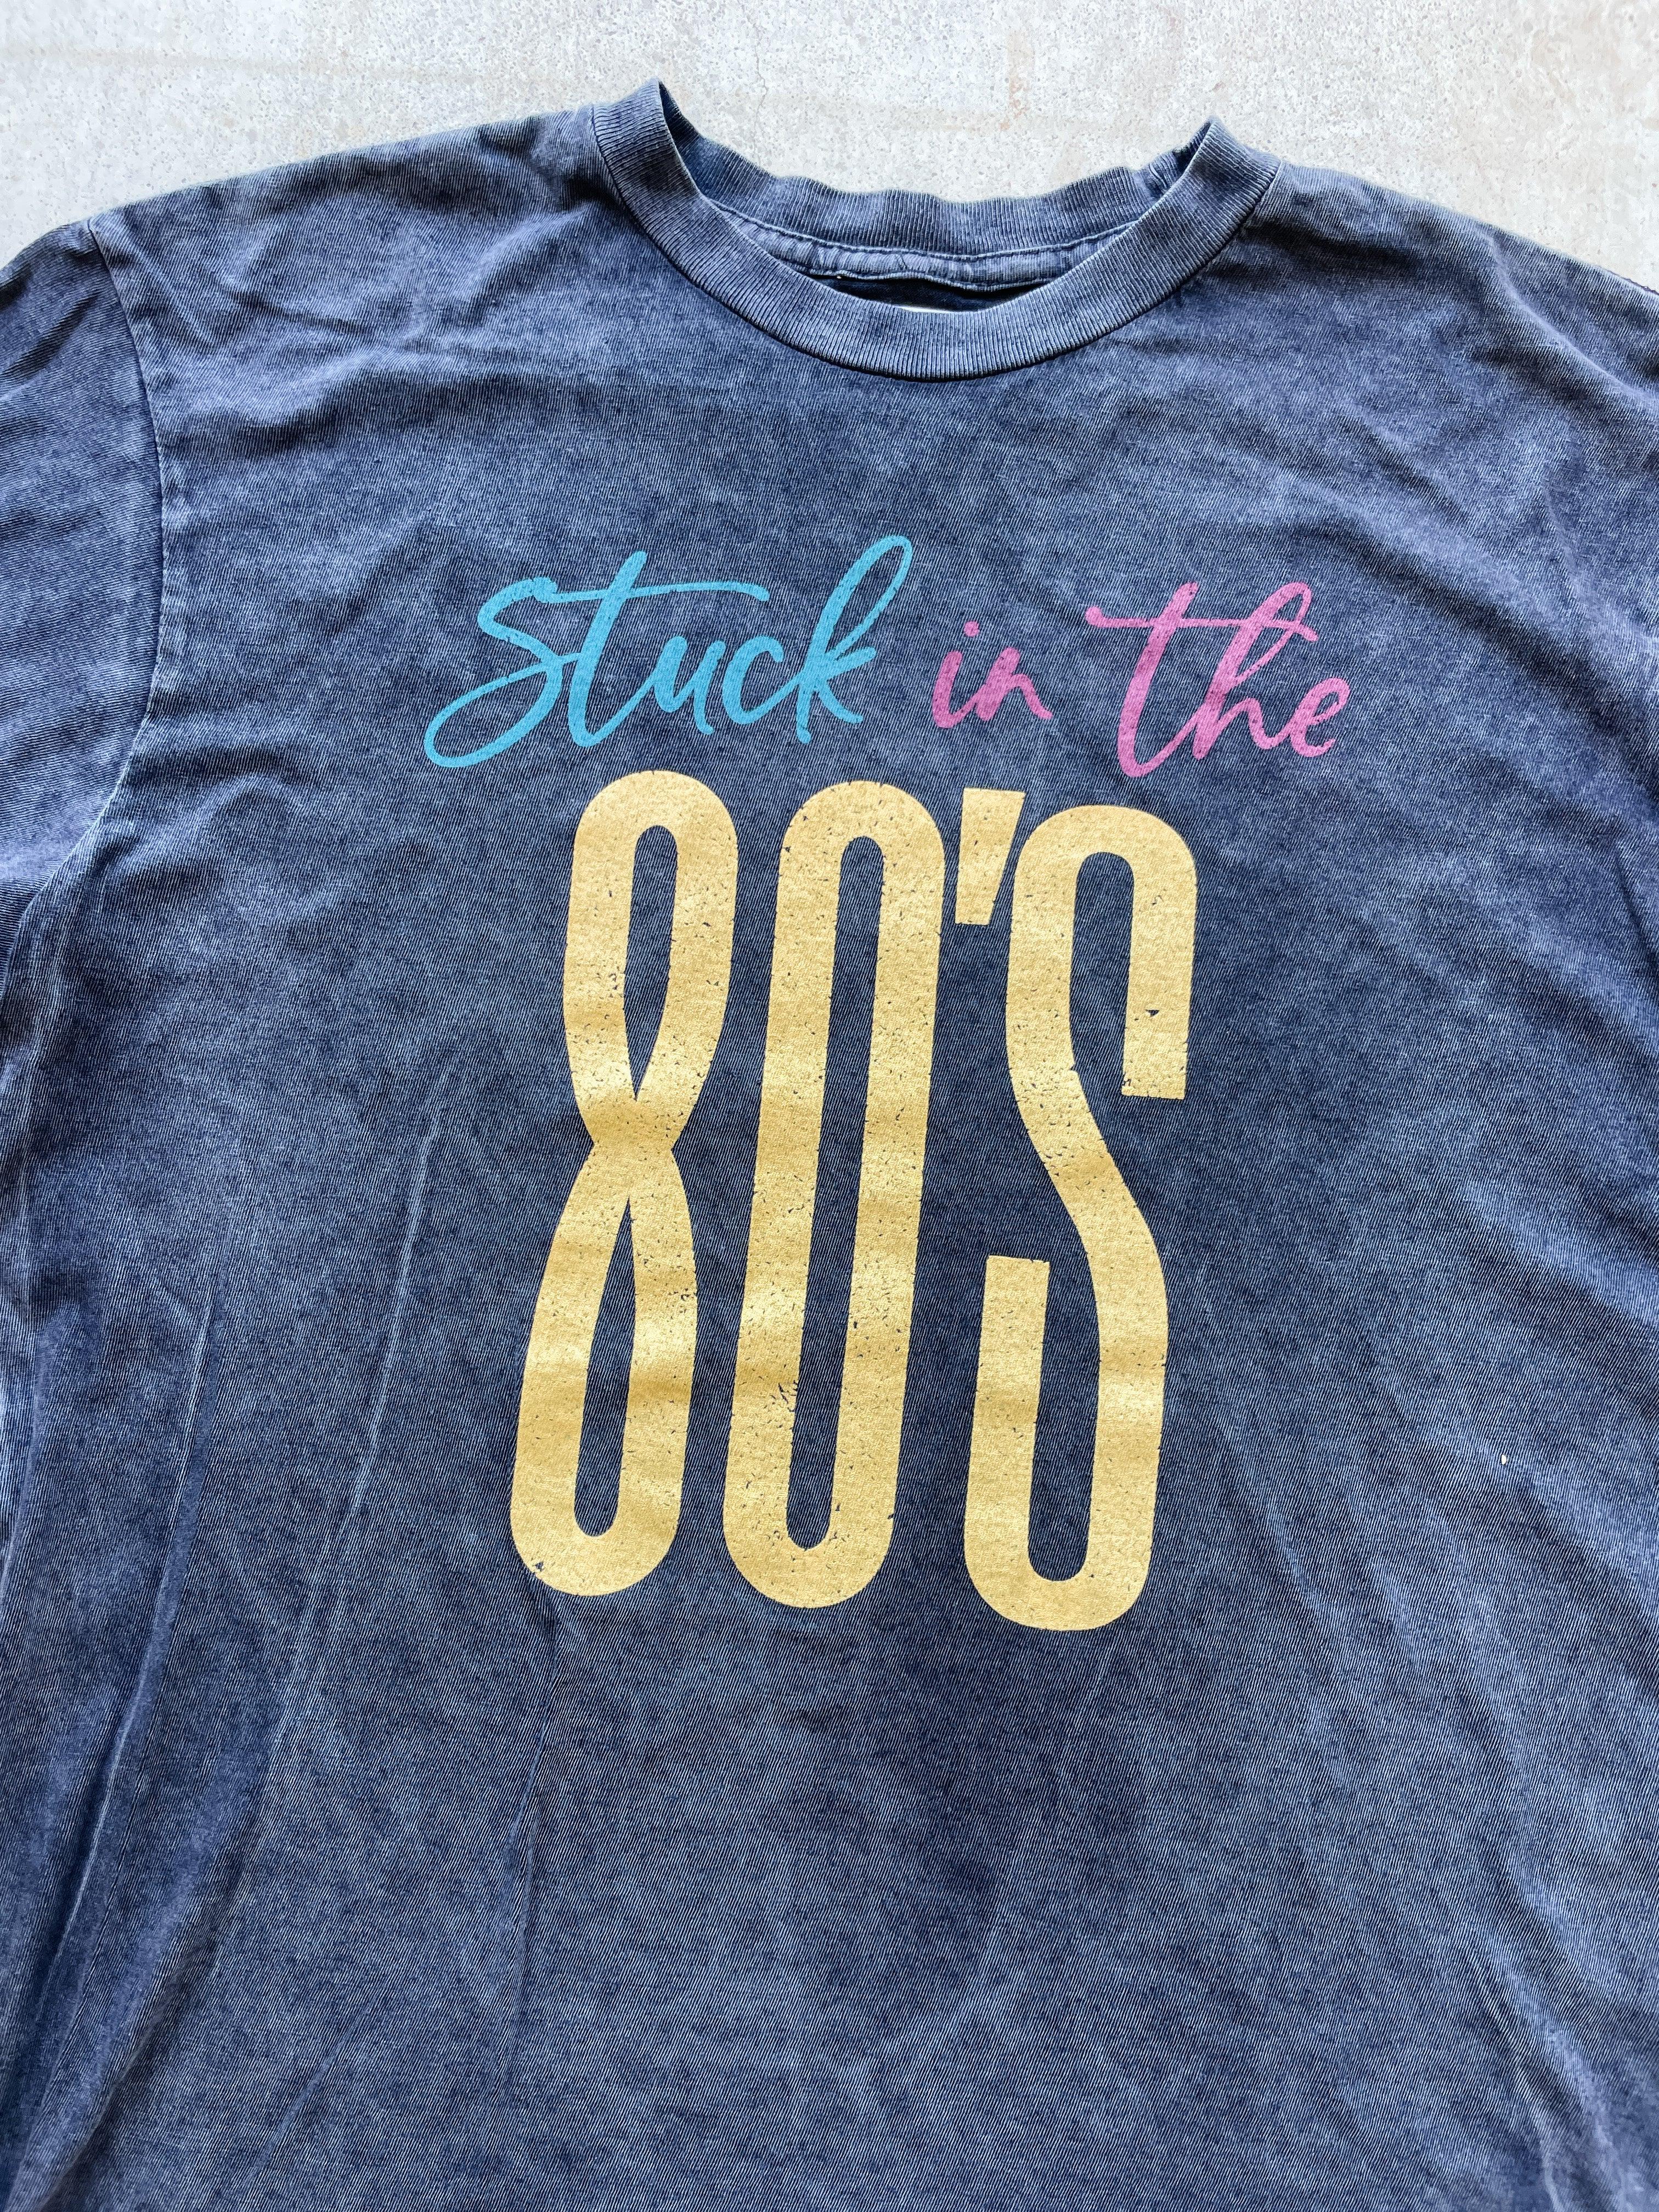 Stuck In The 80's - Vintage Soul